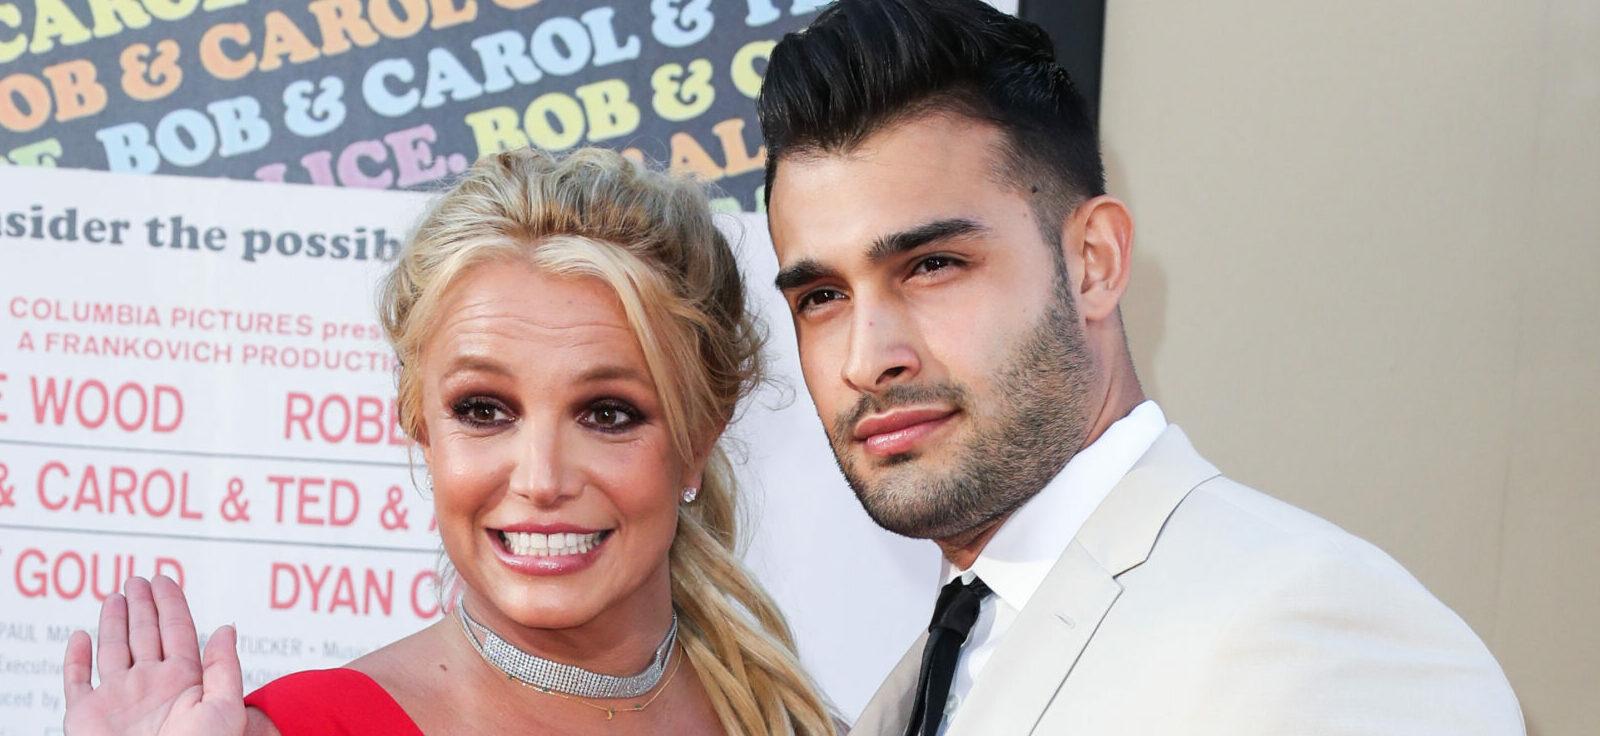 Britney Spears Requests A Margarita On Her Private Plane With Sam Asghari